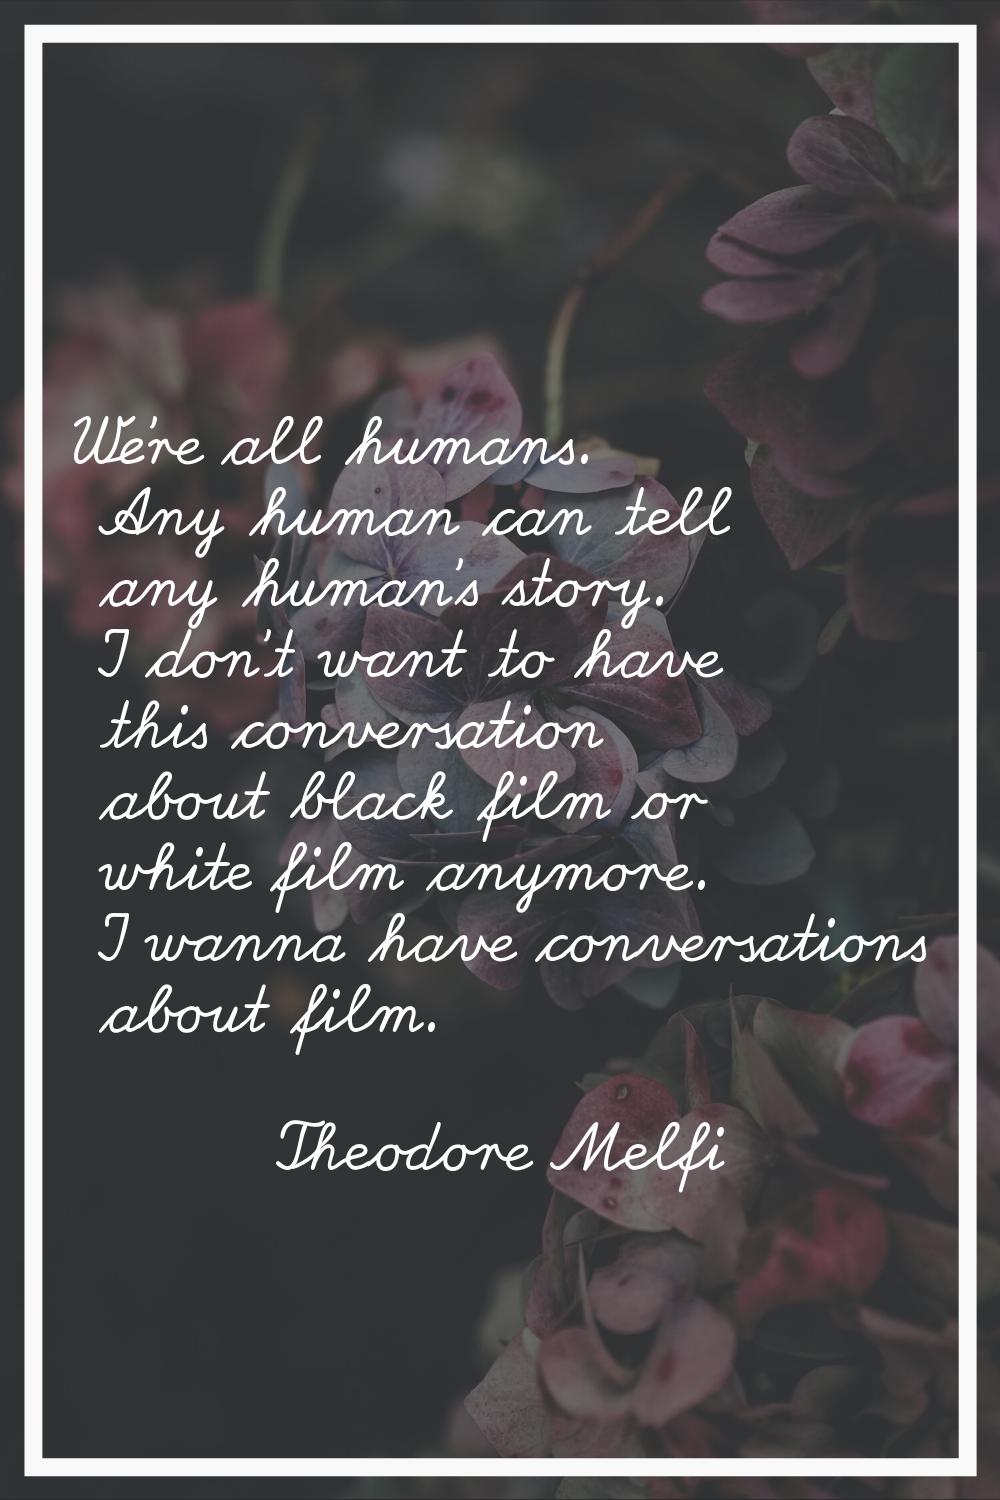 We're all humans. Any human can tell any human's story. I don't want to have this conversation abou